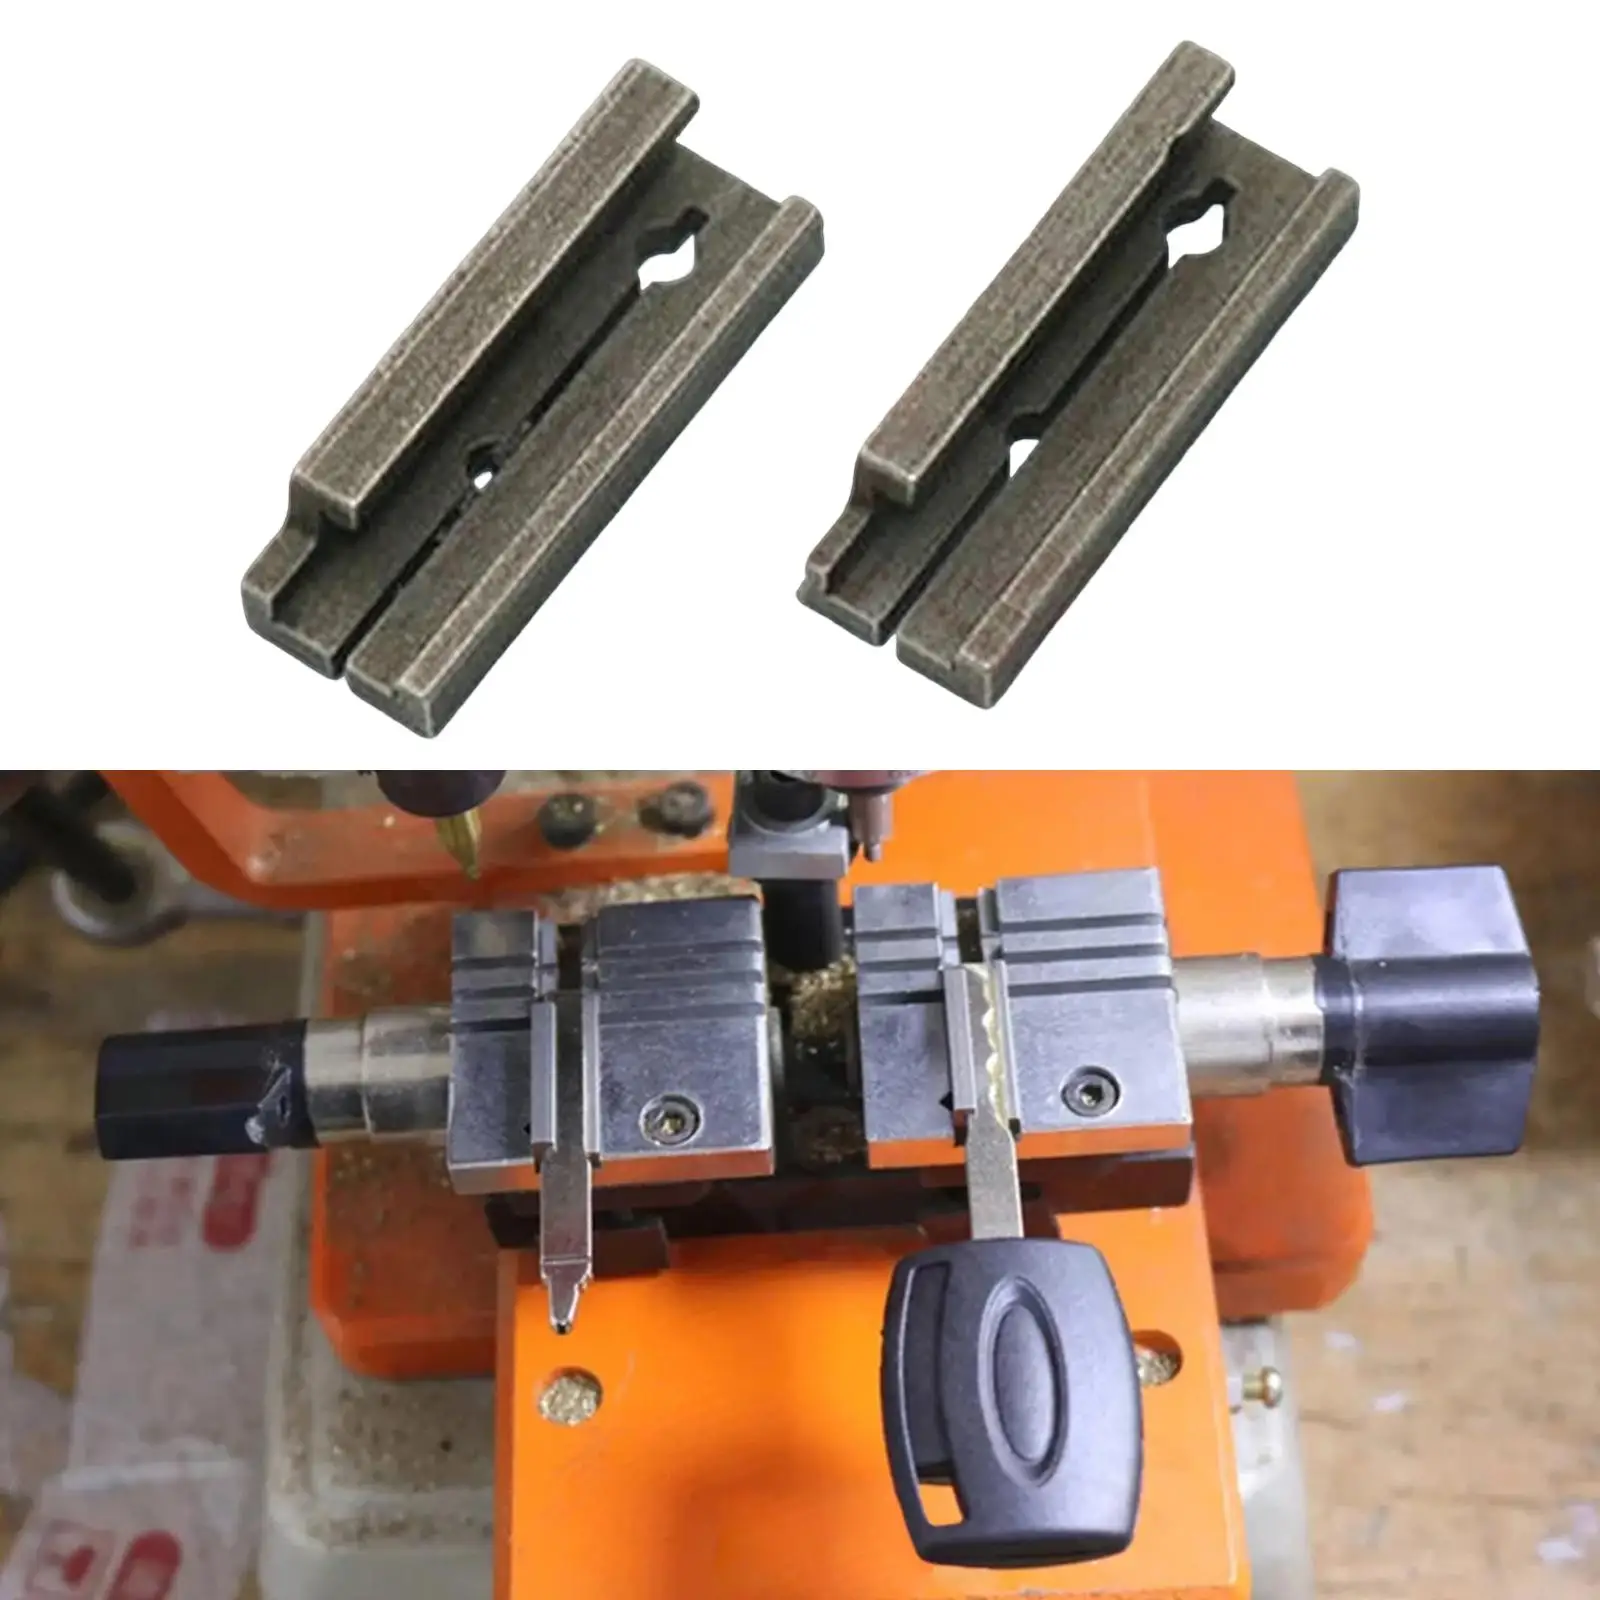 HU101 Duplicating Fixture Clamp Stainless Steel for Ford Blank Key Cutting Key Cutter Machine Part High Qualtiy